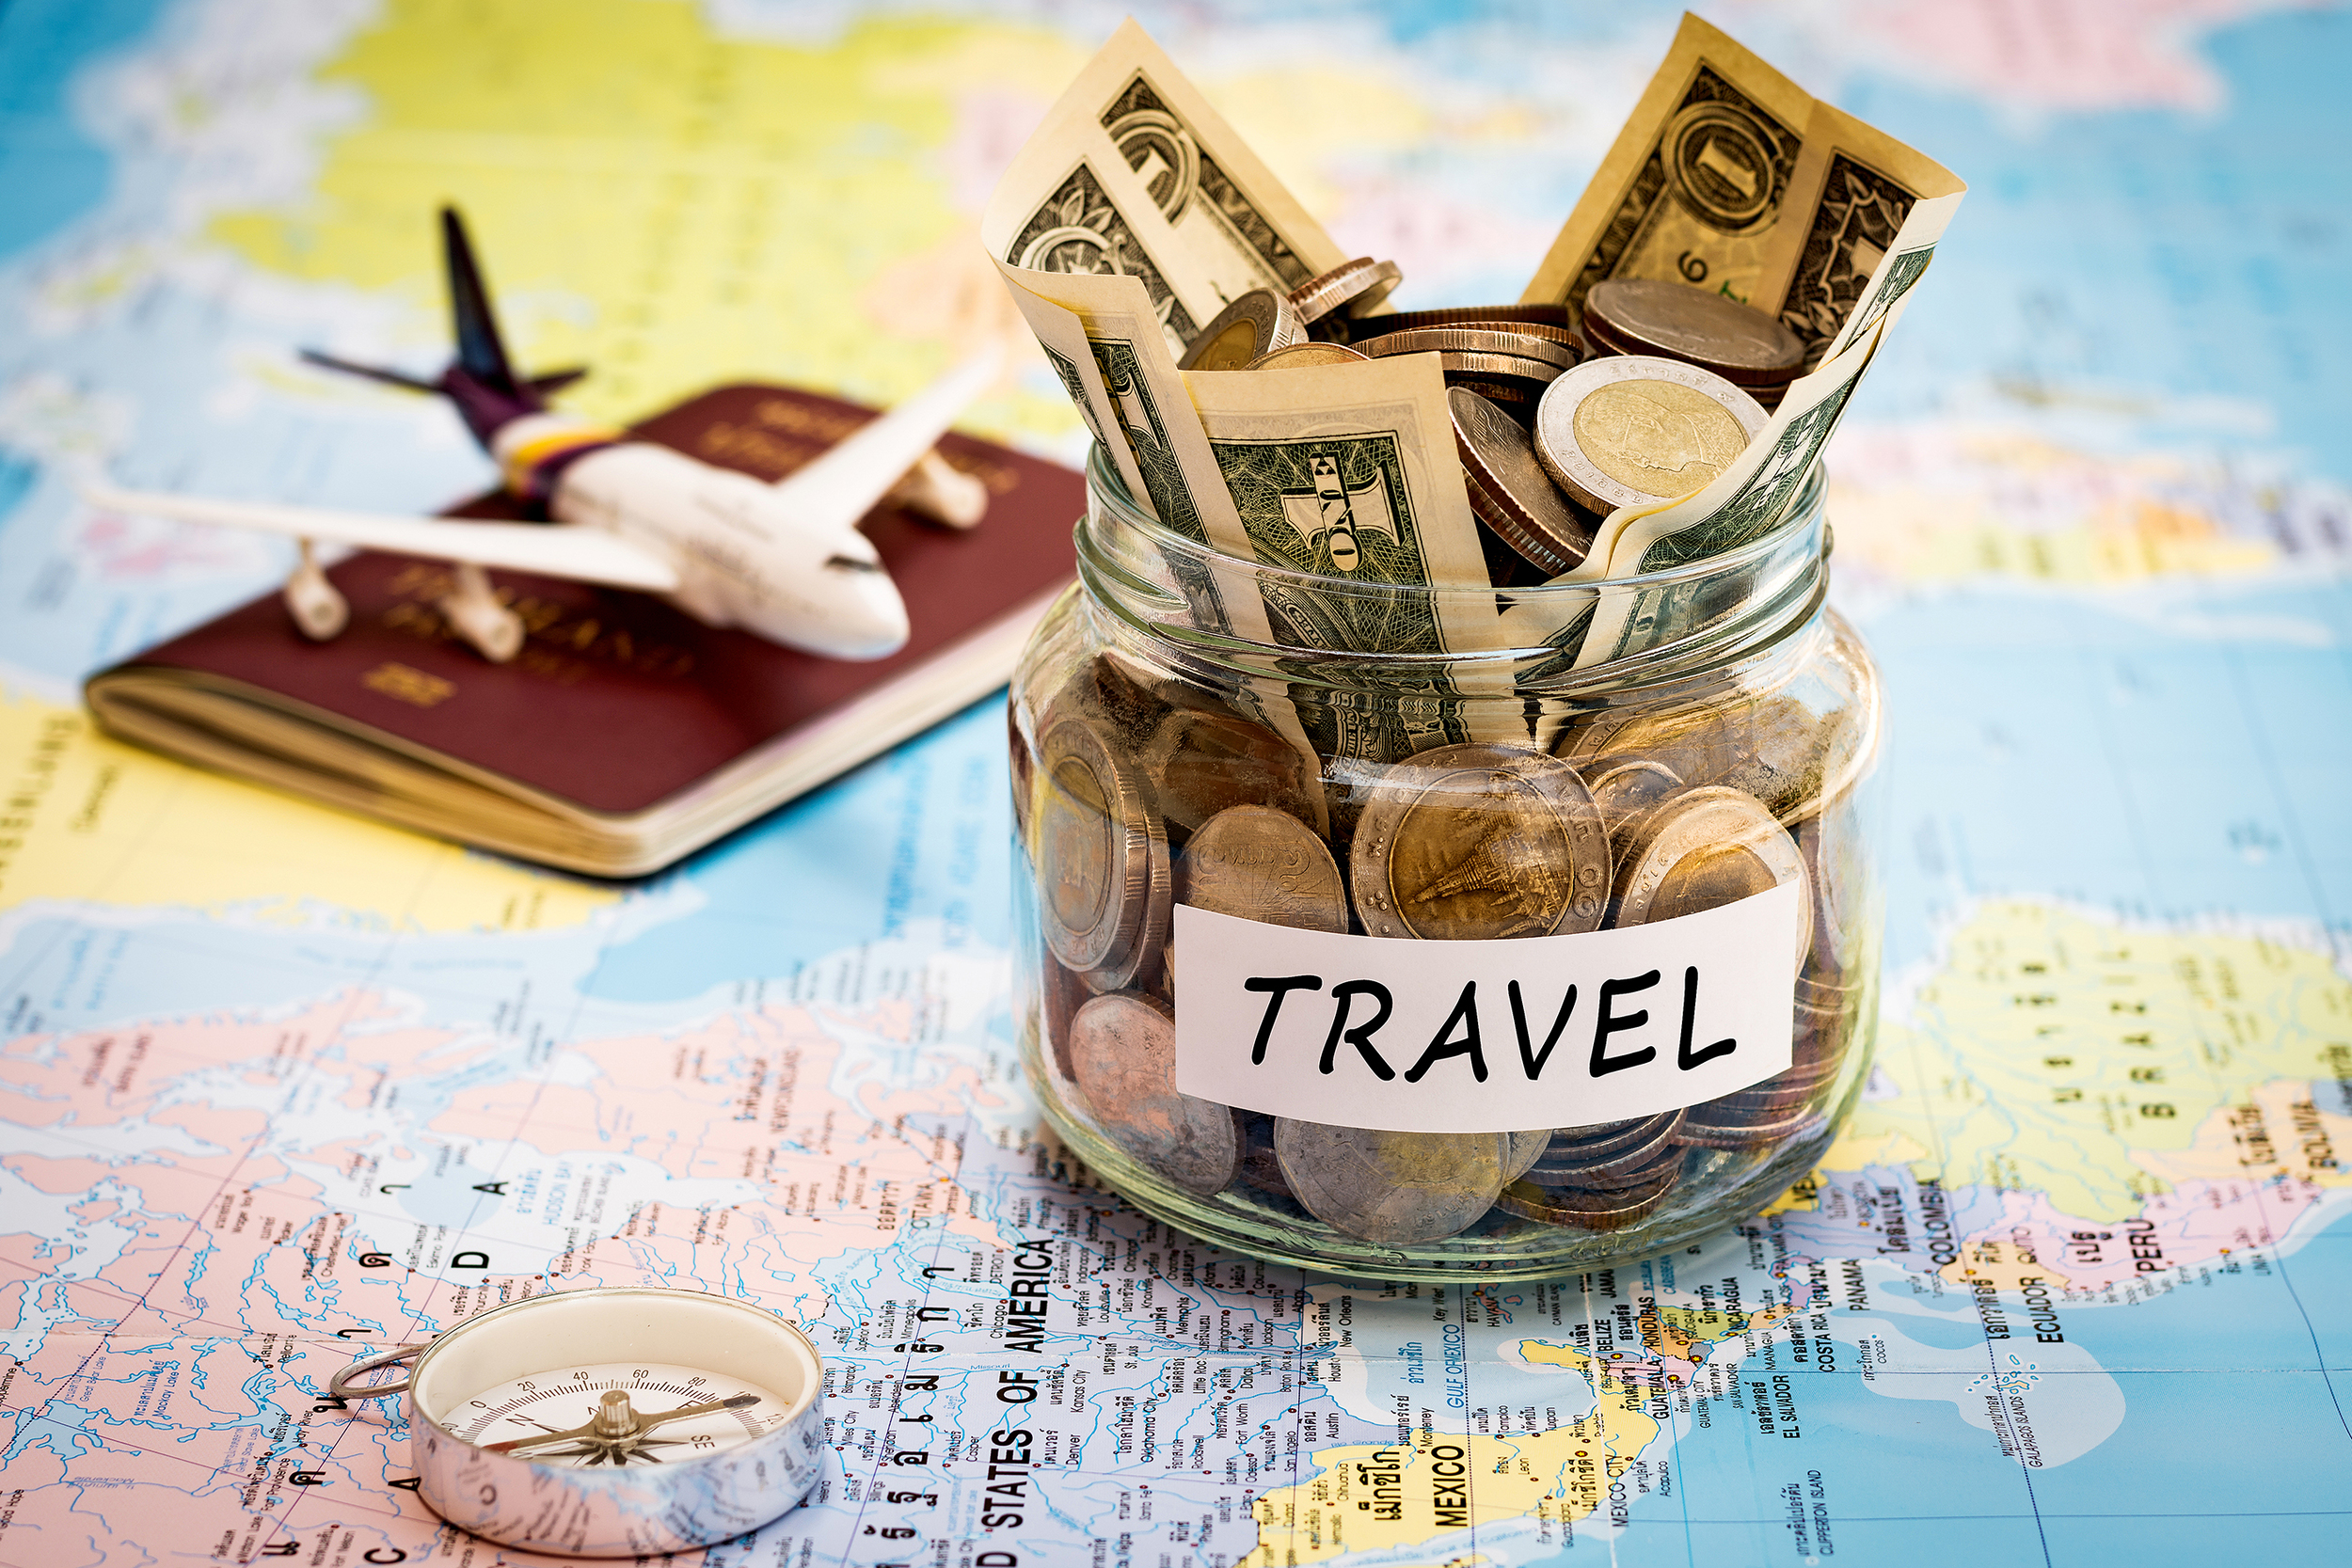 Budget travel: Tips for saving money on your next trip